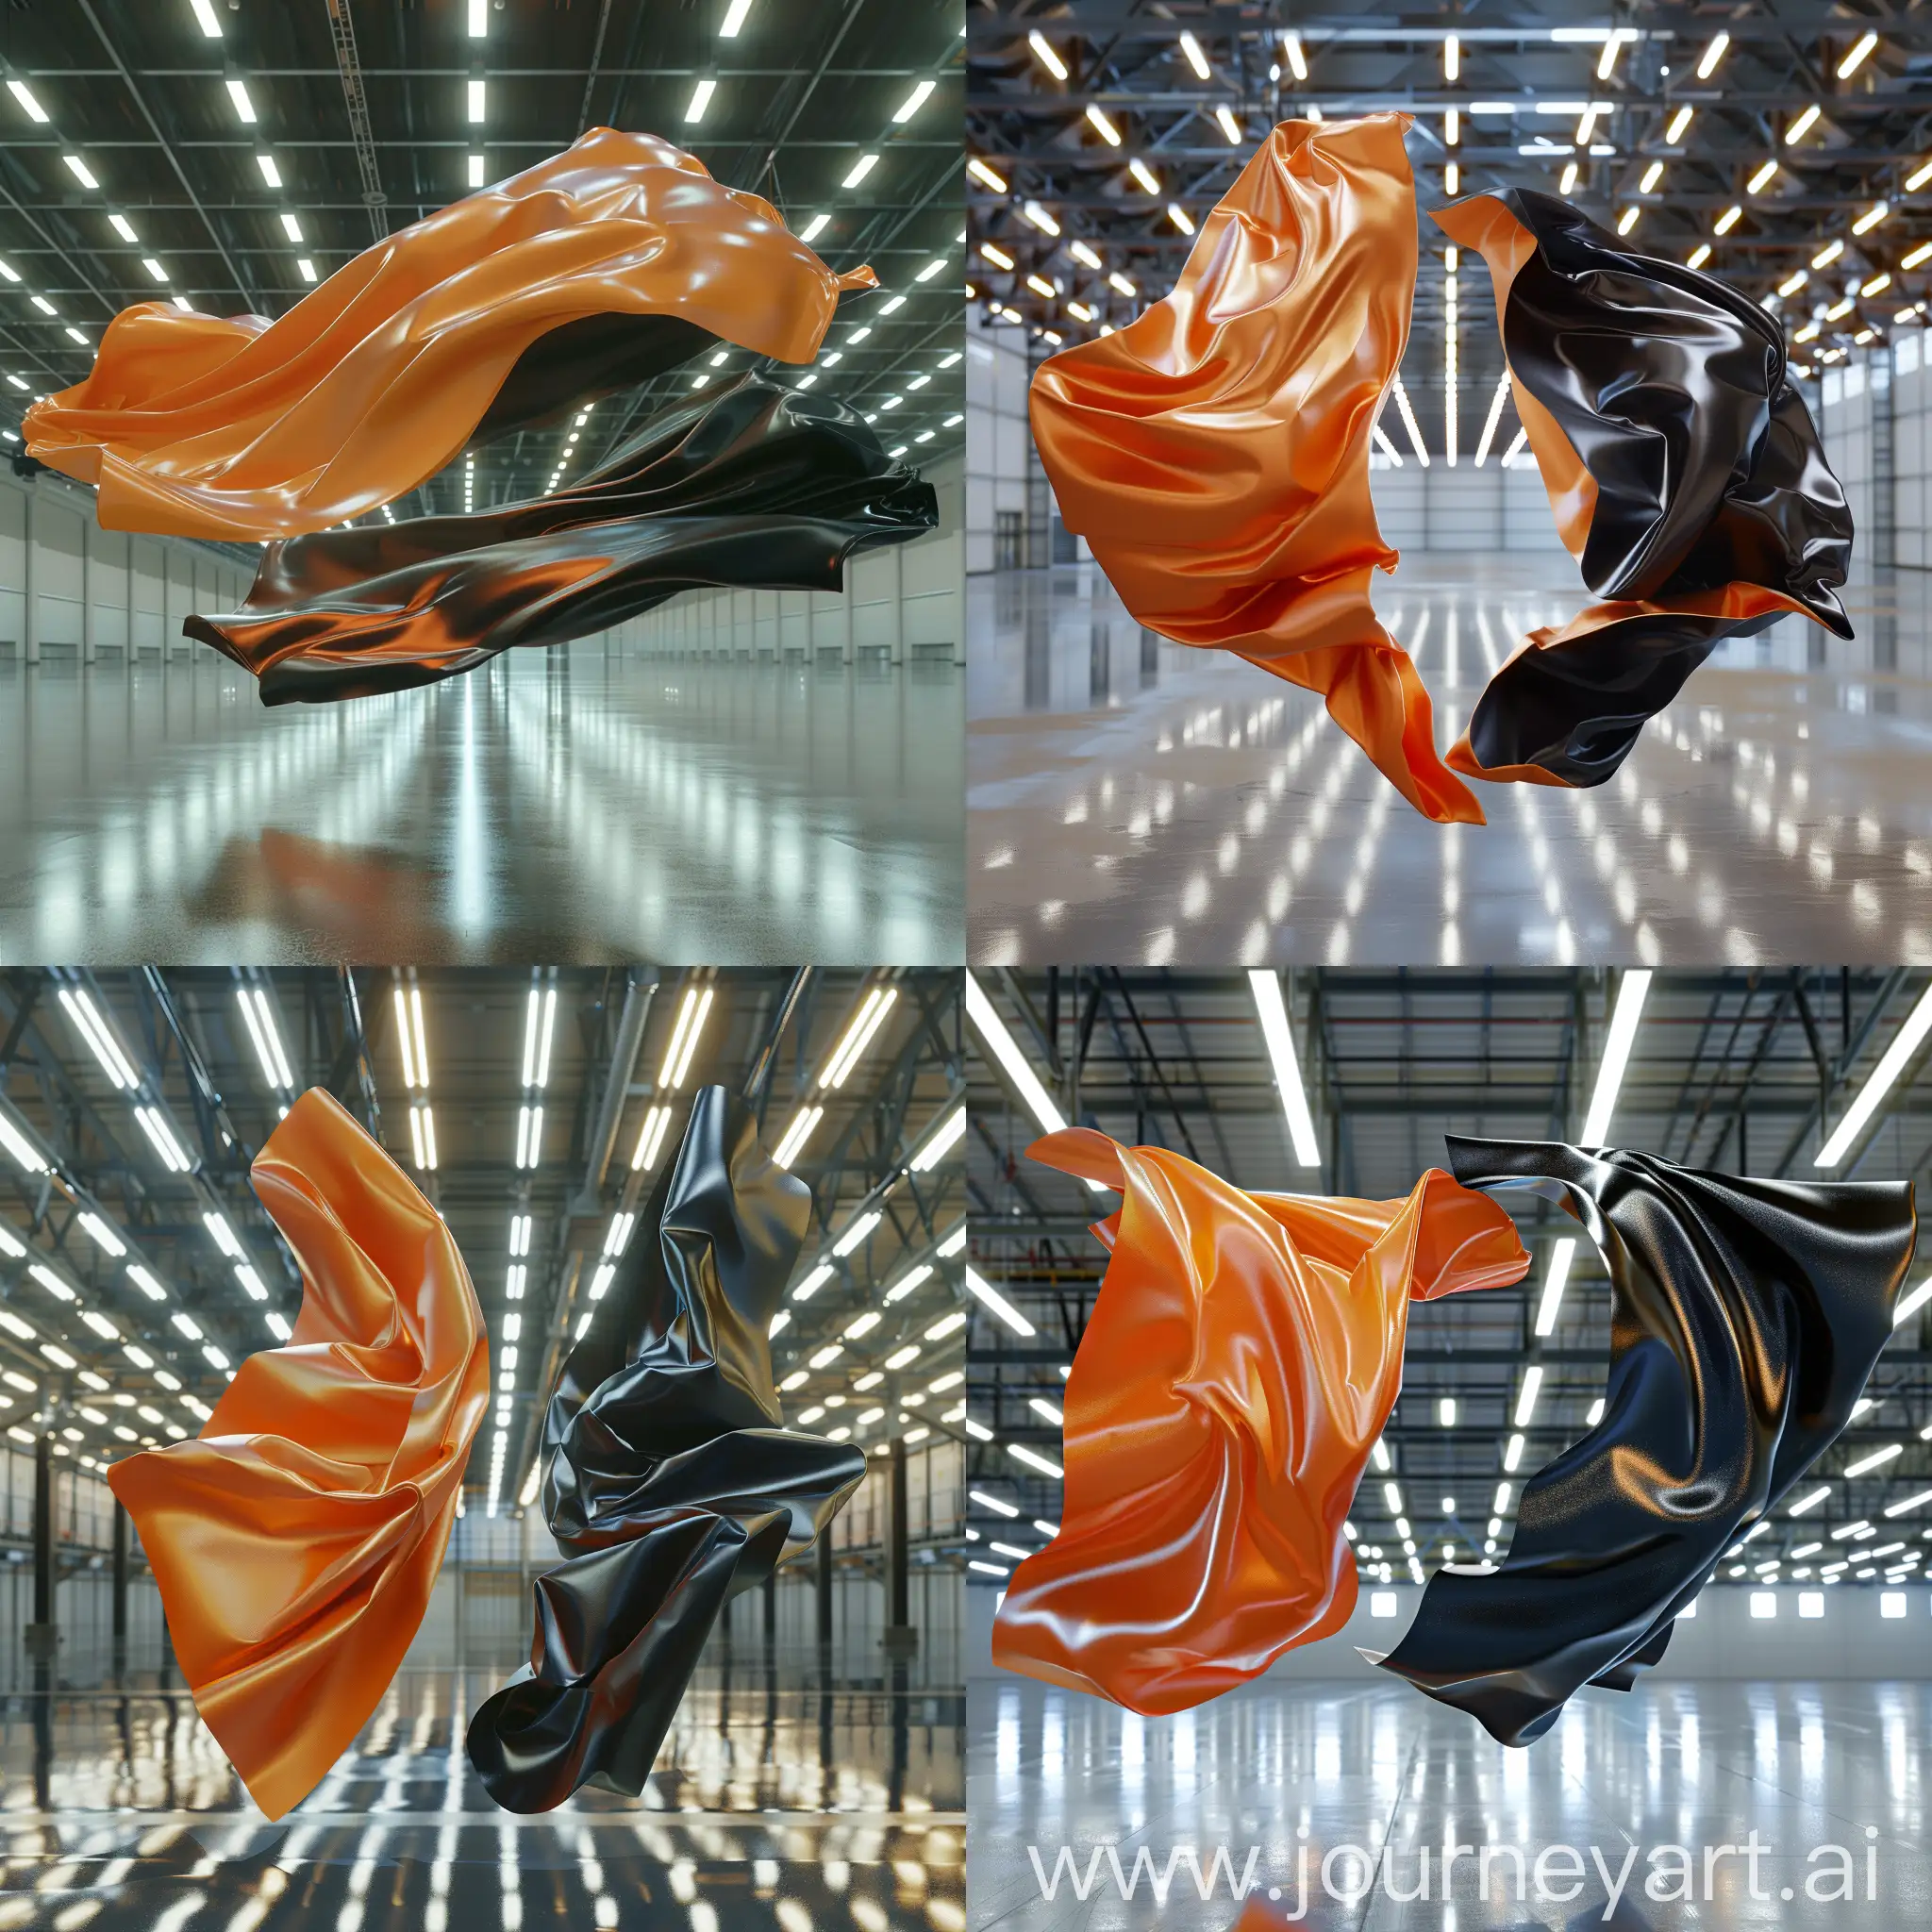 (two) silky fabrics of glossy orange and black color levitating about 4 meters in a big hall with rows of light on the ceiling, the ground floor is highly reflective, the camera is looking up from the bottom from 25 meter distance, photo realistic, high resolution, unreal quality